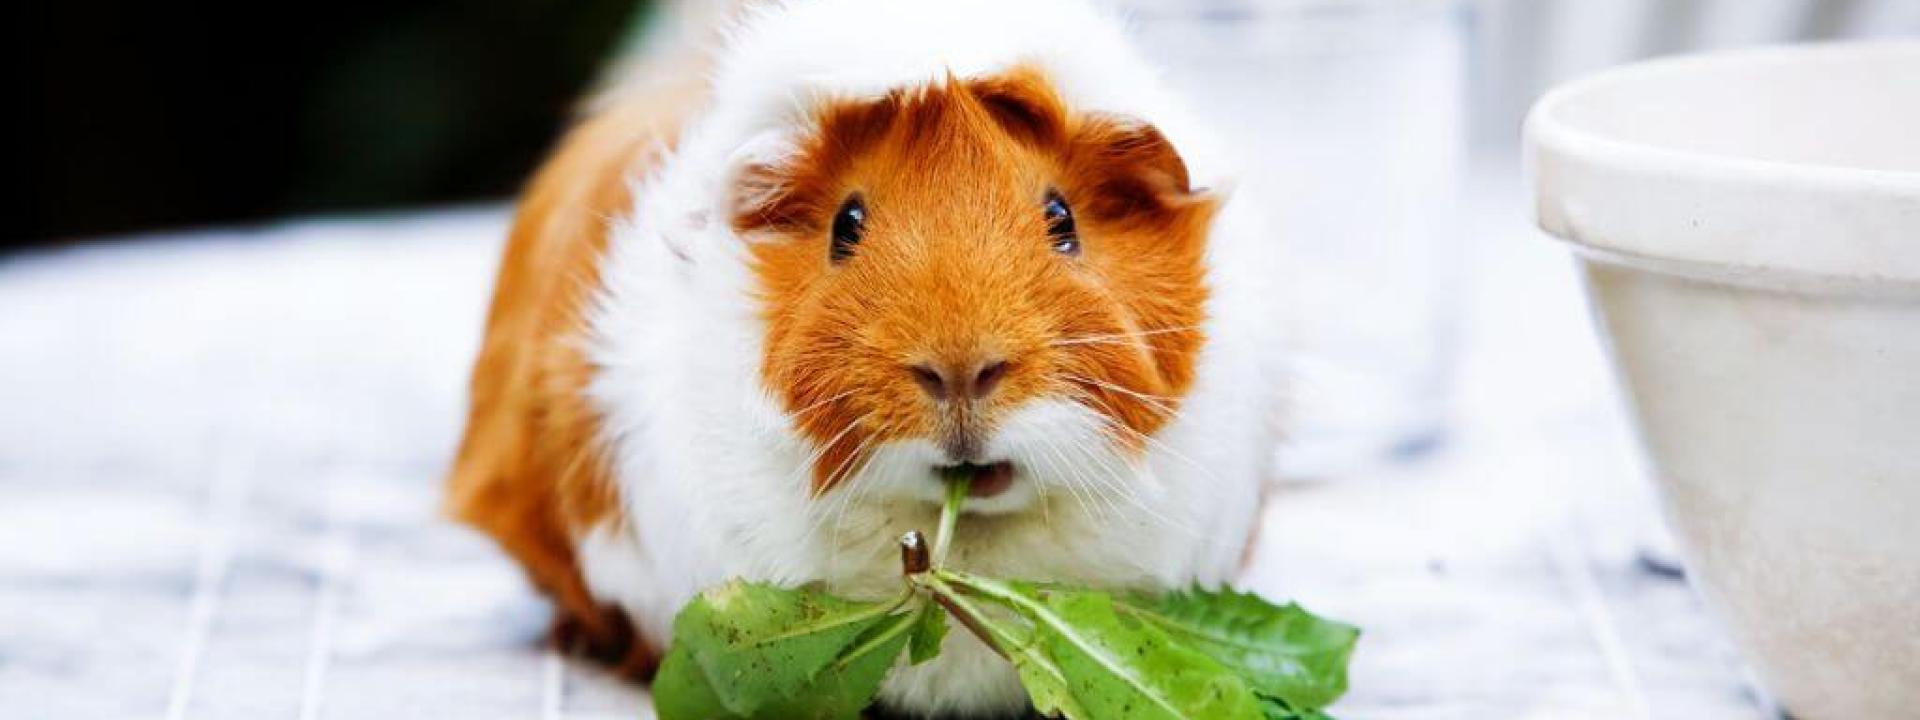 Guinea pig eating on table, close up